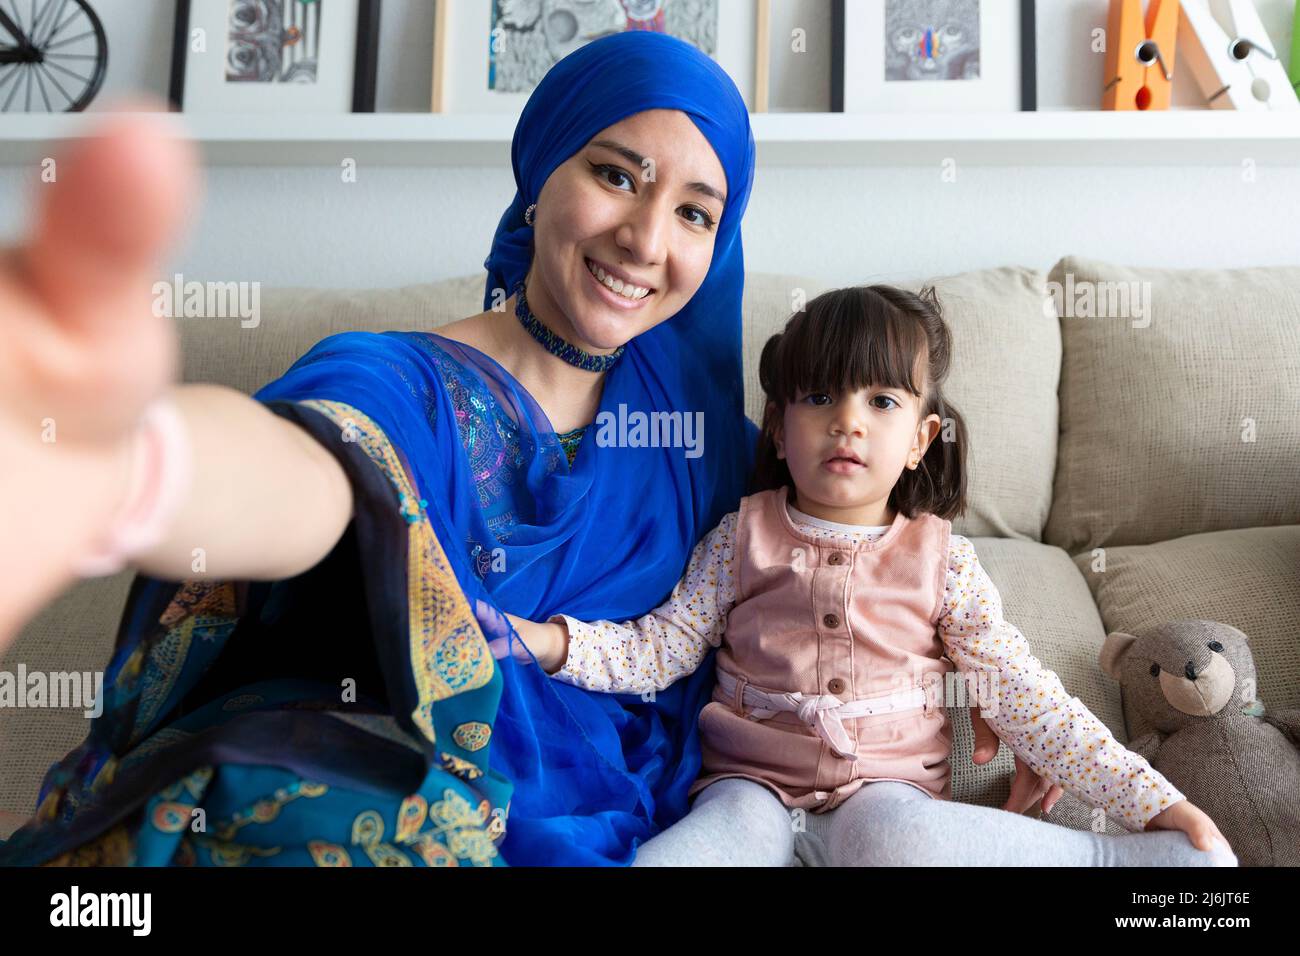 Young Muslim woman taking a self portrait with her little daughter. Single parent family having a fun time at home. Stock Photo